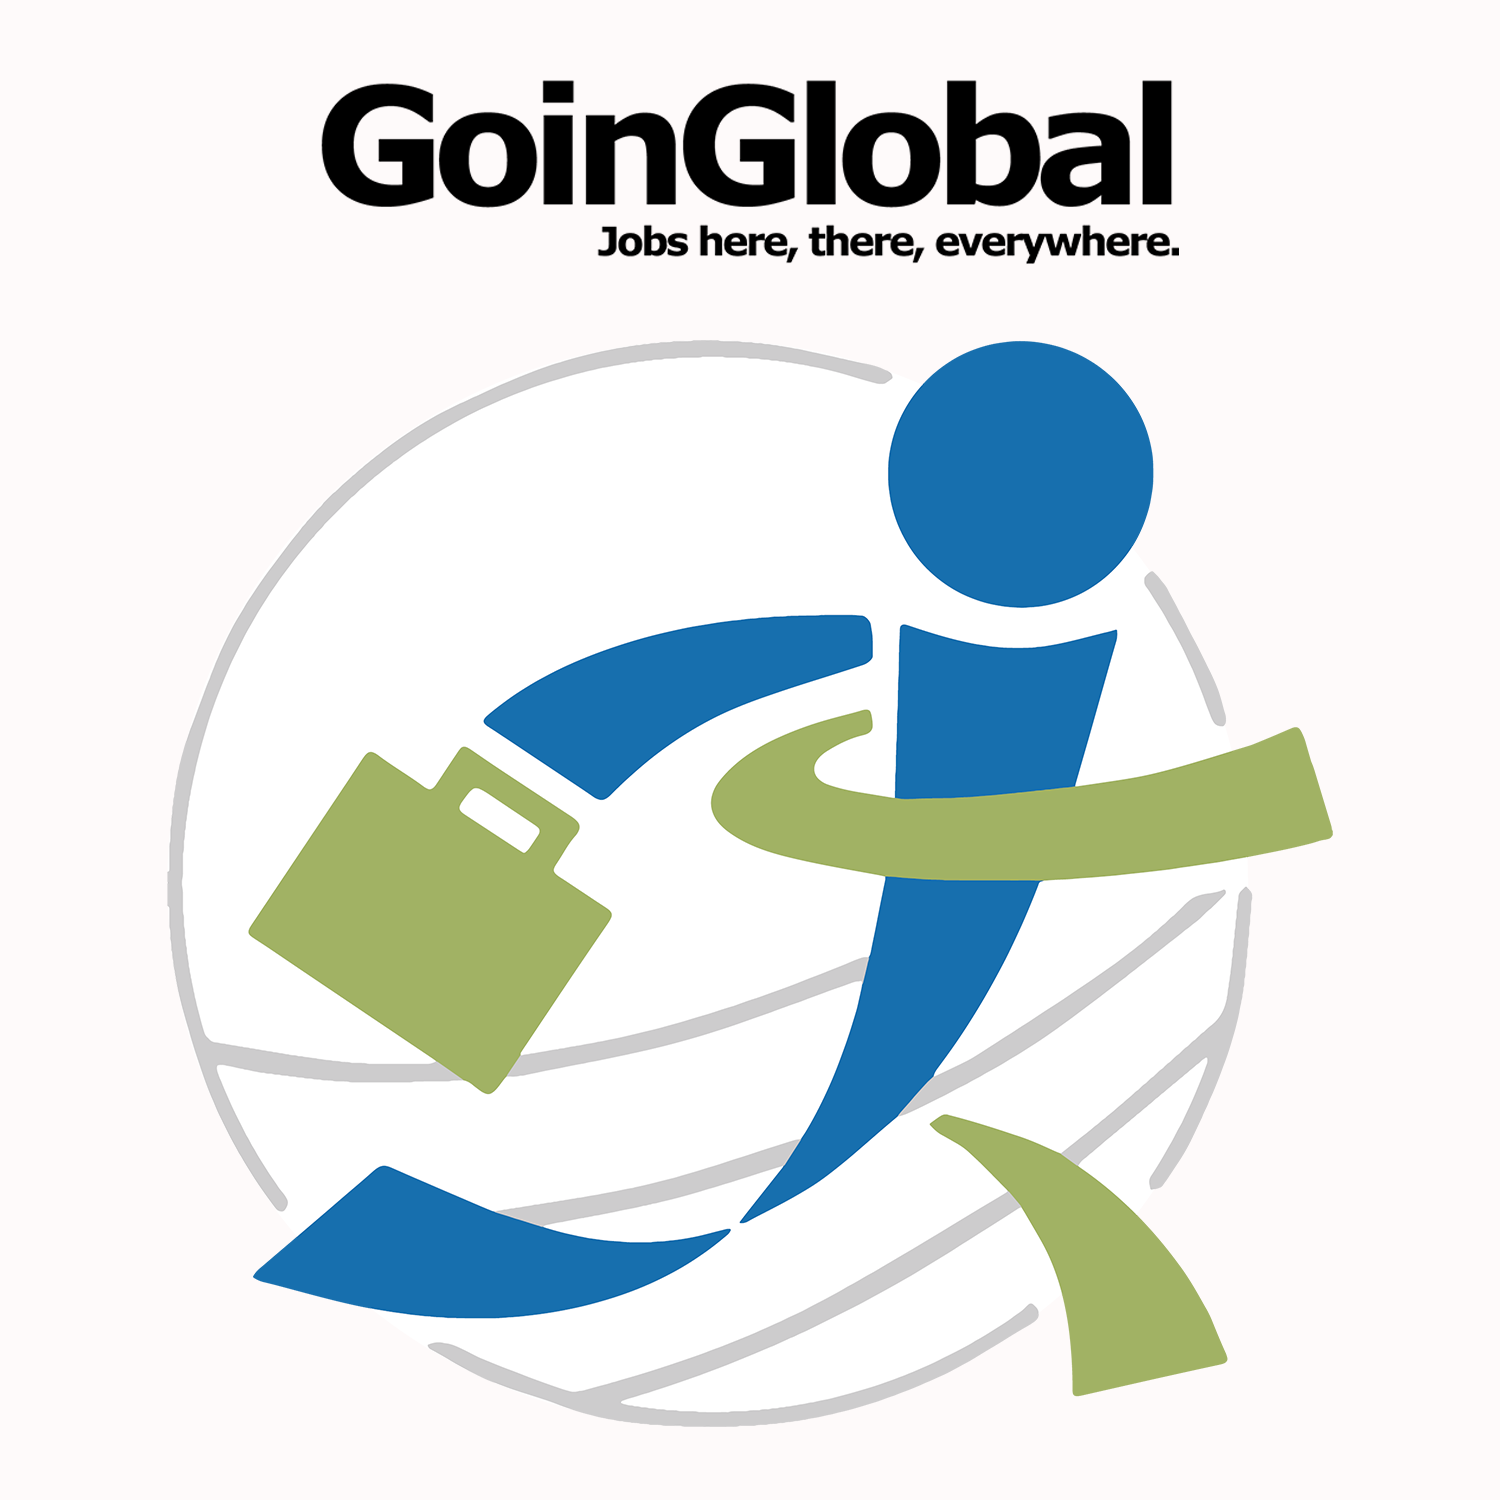 Logo for GoinGlobal. "GoinGlobal. Jobs here, there, everywhere." Shows a person running while holding a briefcase.